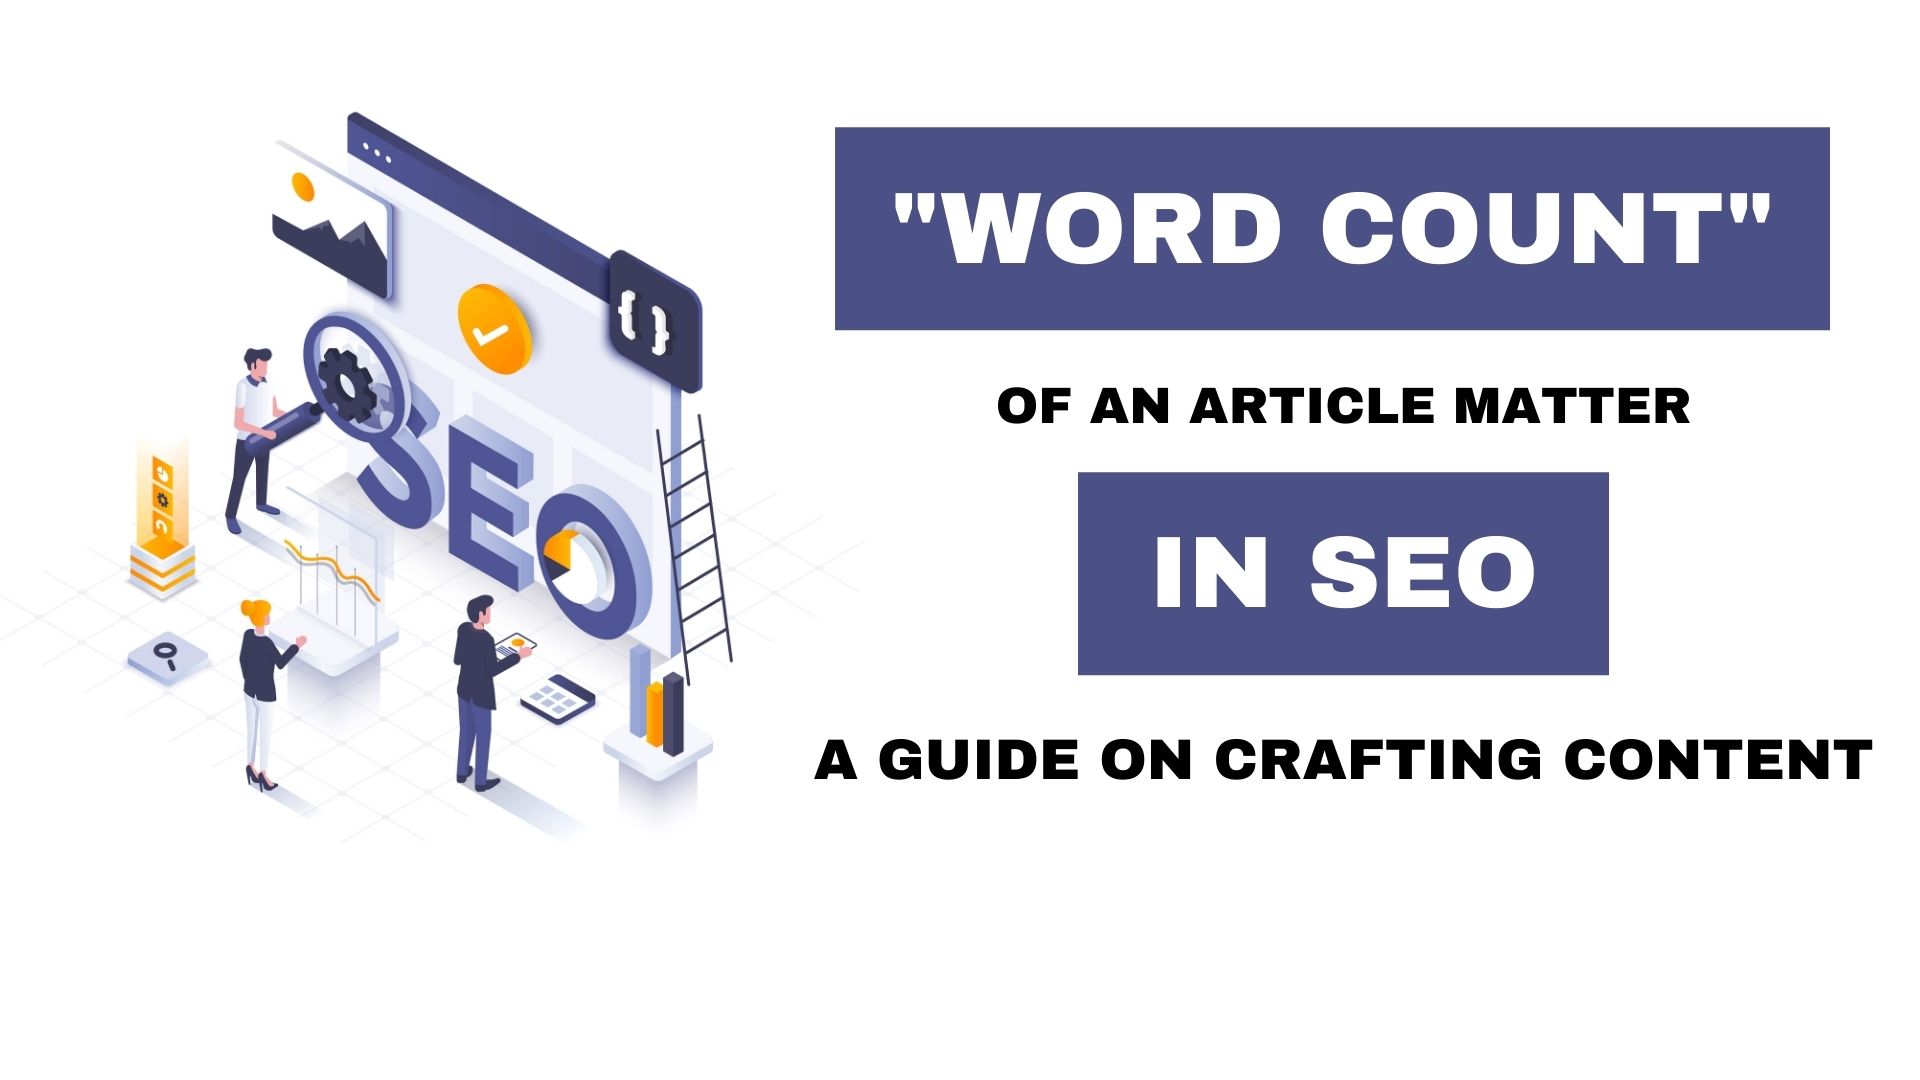 Does the “Word Count” Of an Article Matters in SEO | A Guide on Crafting Content